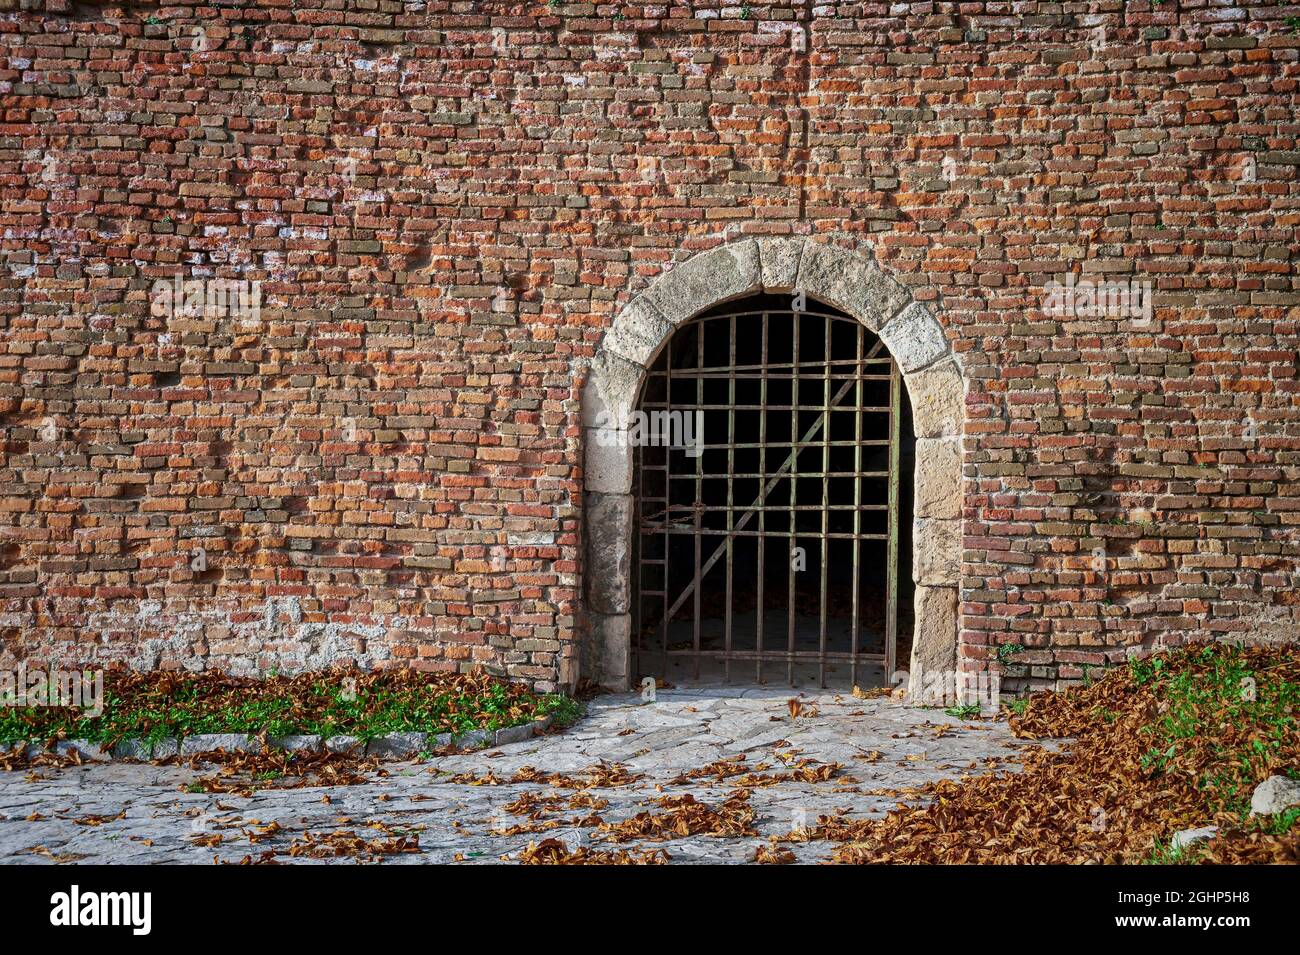 Medieval Fortress Dungeon Door with Iron Bars in Brick Wall Stock Photo